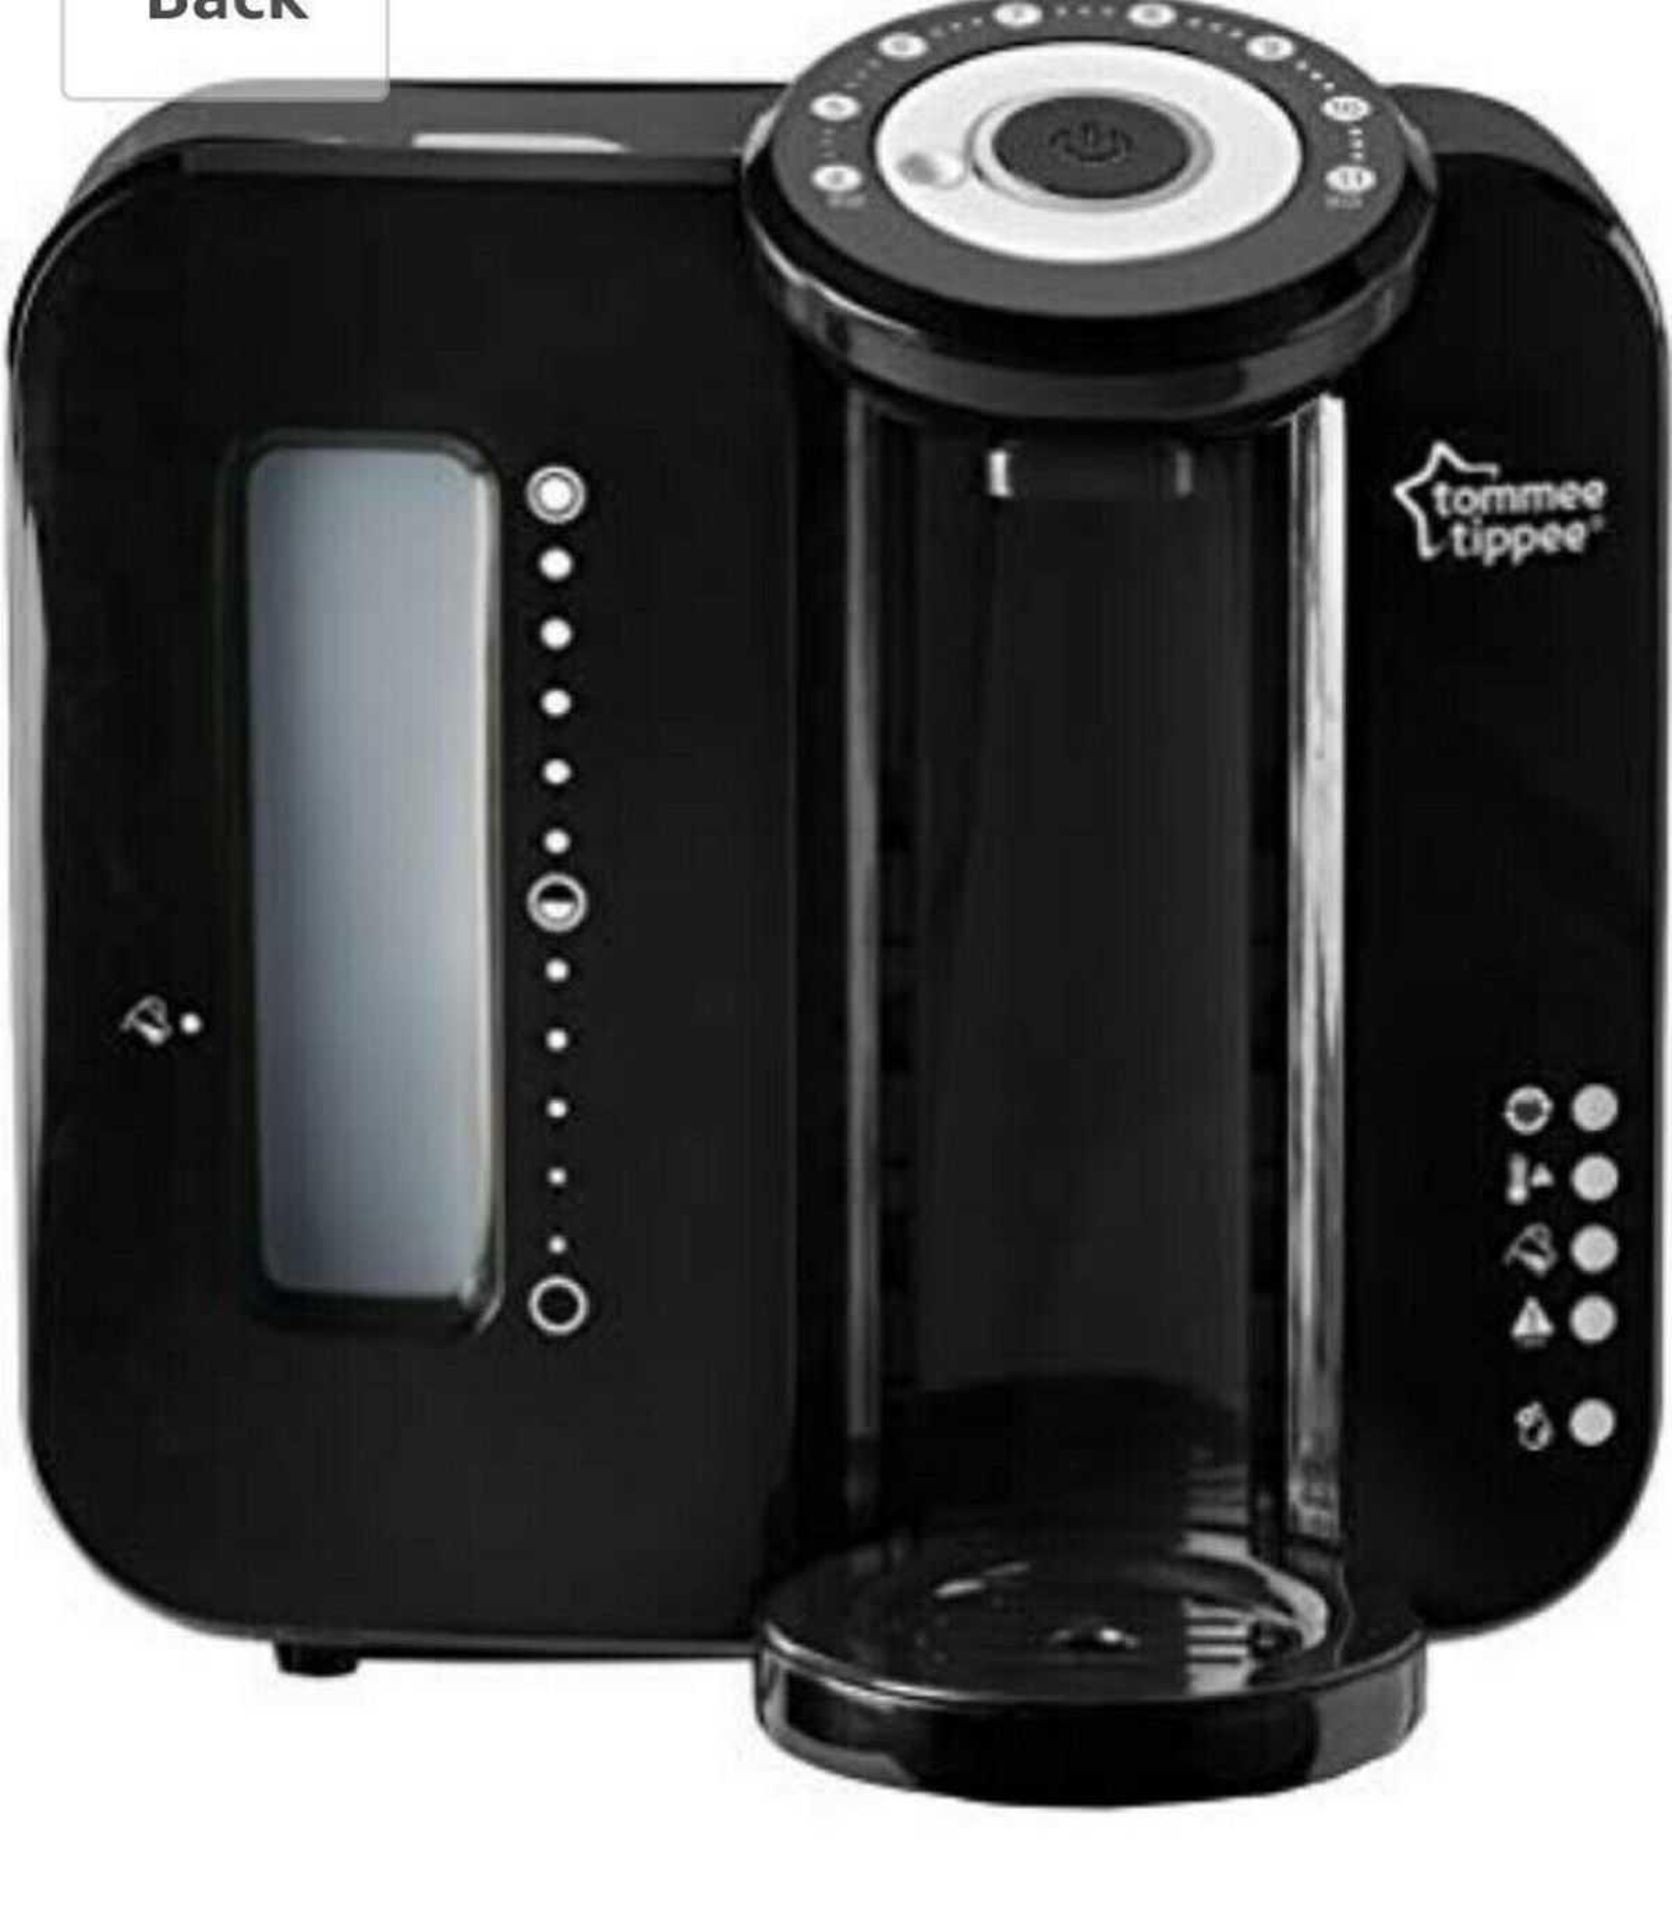 Rrp £75 Tommee Tippee Perfect Preparation Machines In Black